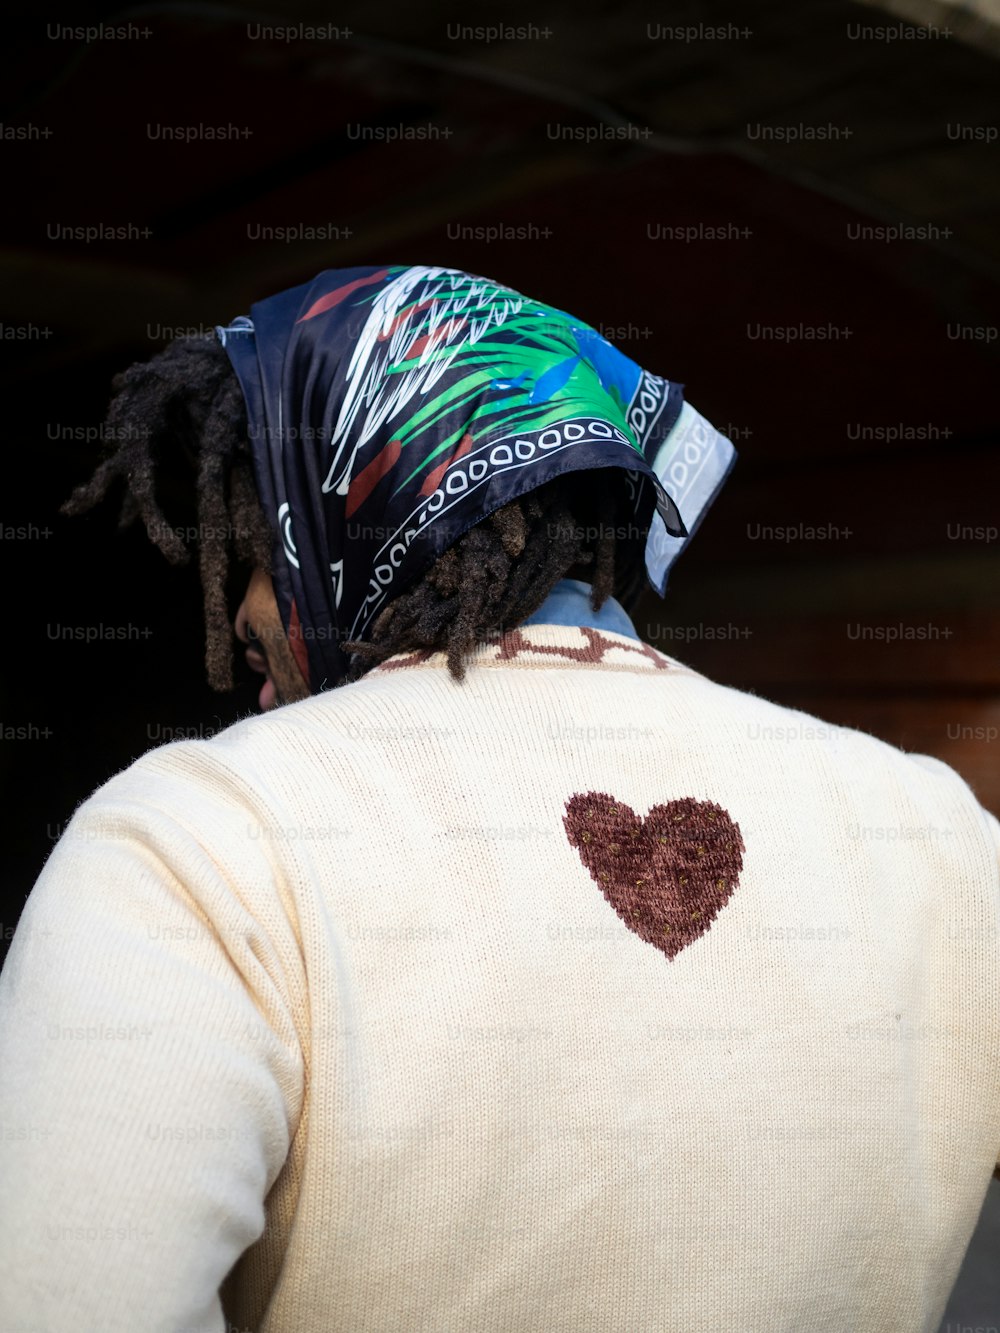 a man with dreadlocks wearing a sweater with a heart on it